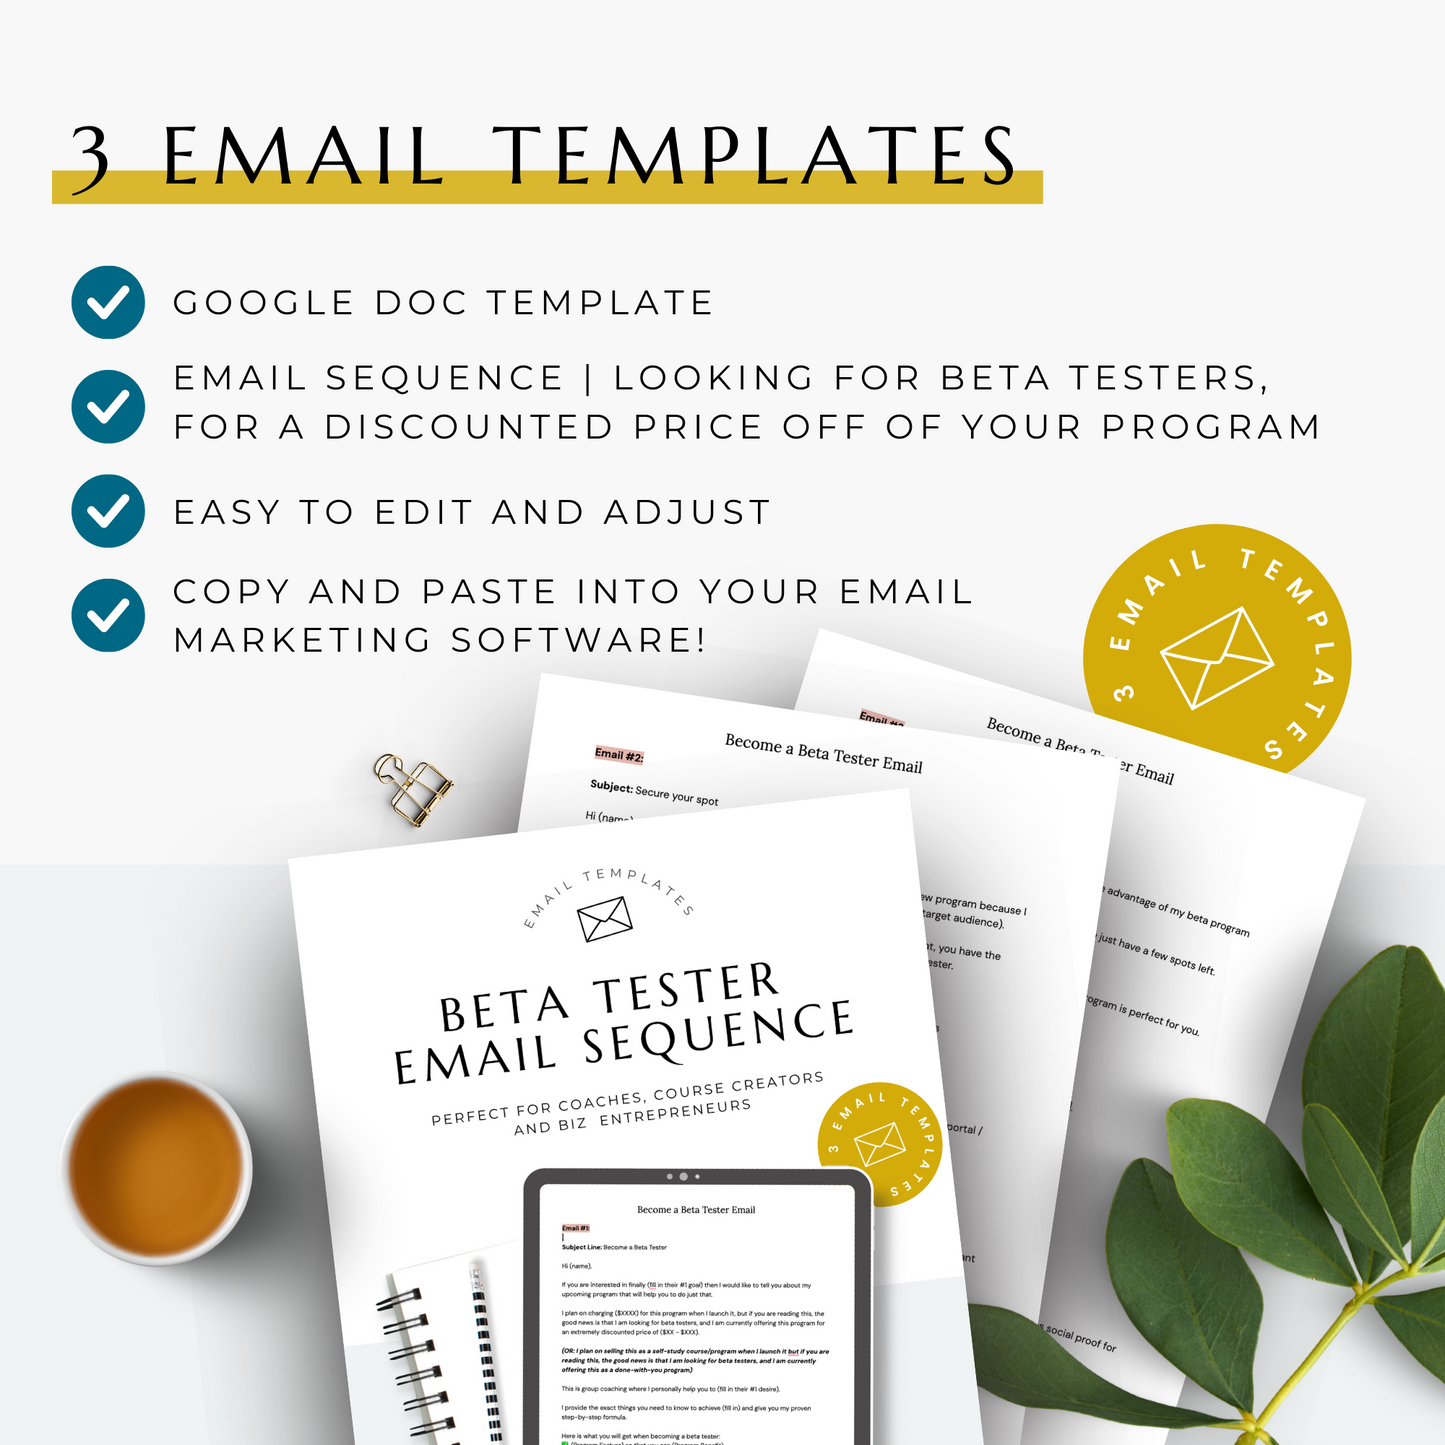 Become a Beta Tester Email Sequence